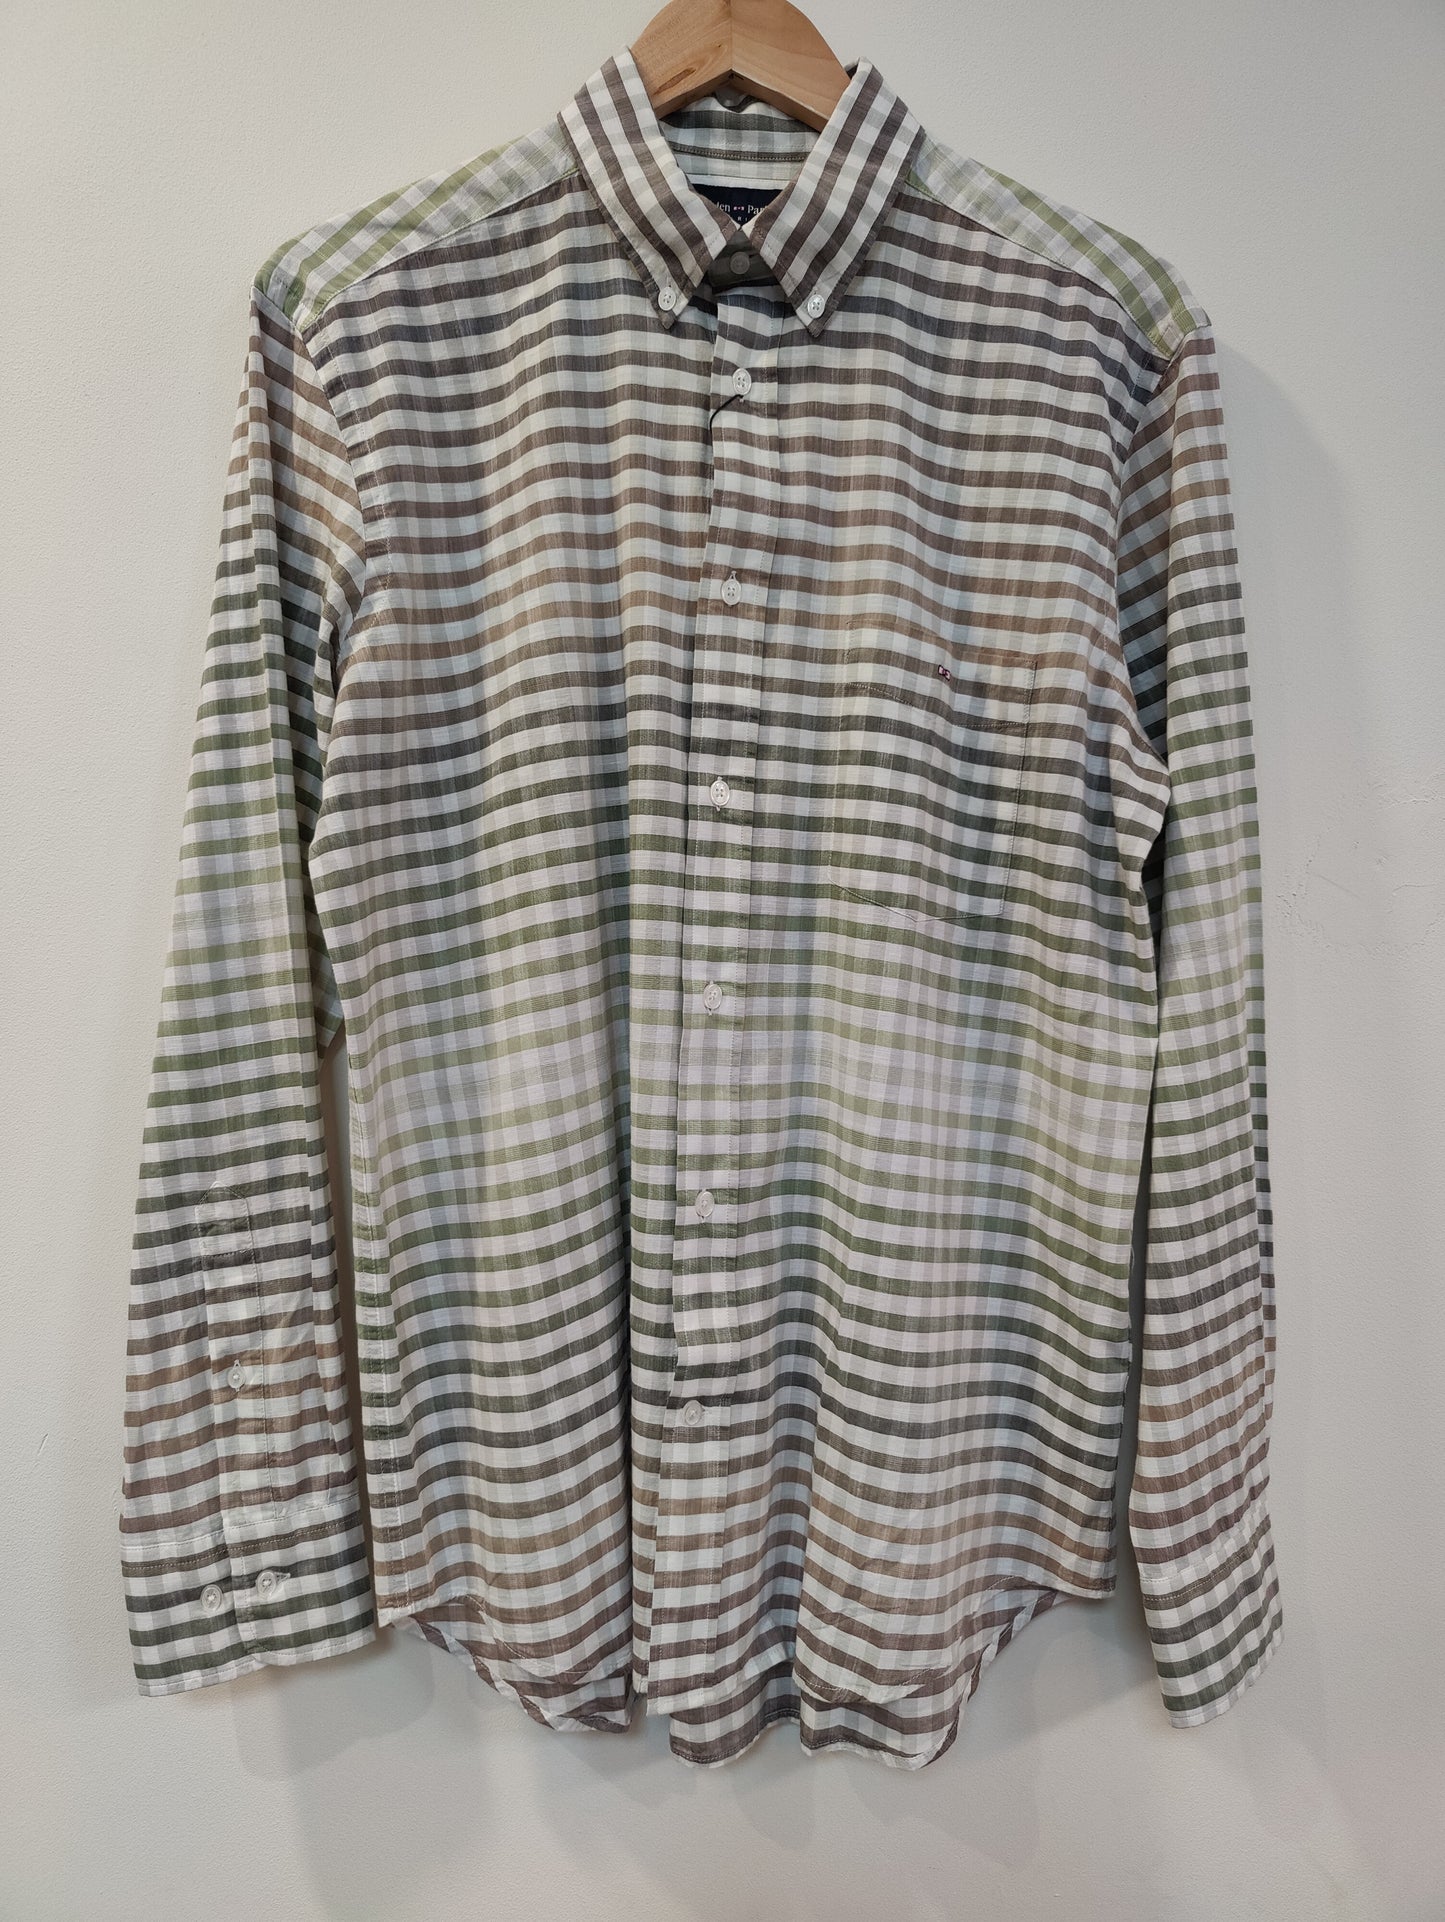 Checked ombre shirt in natural by Eden Park